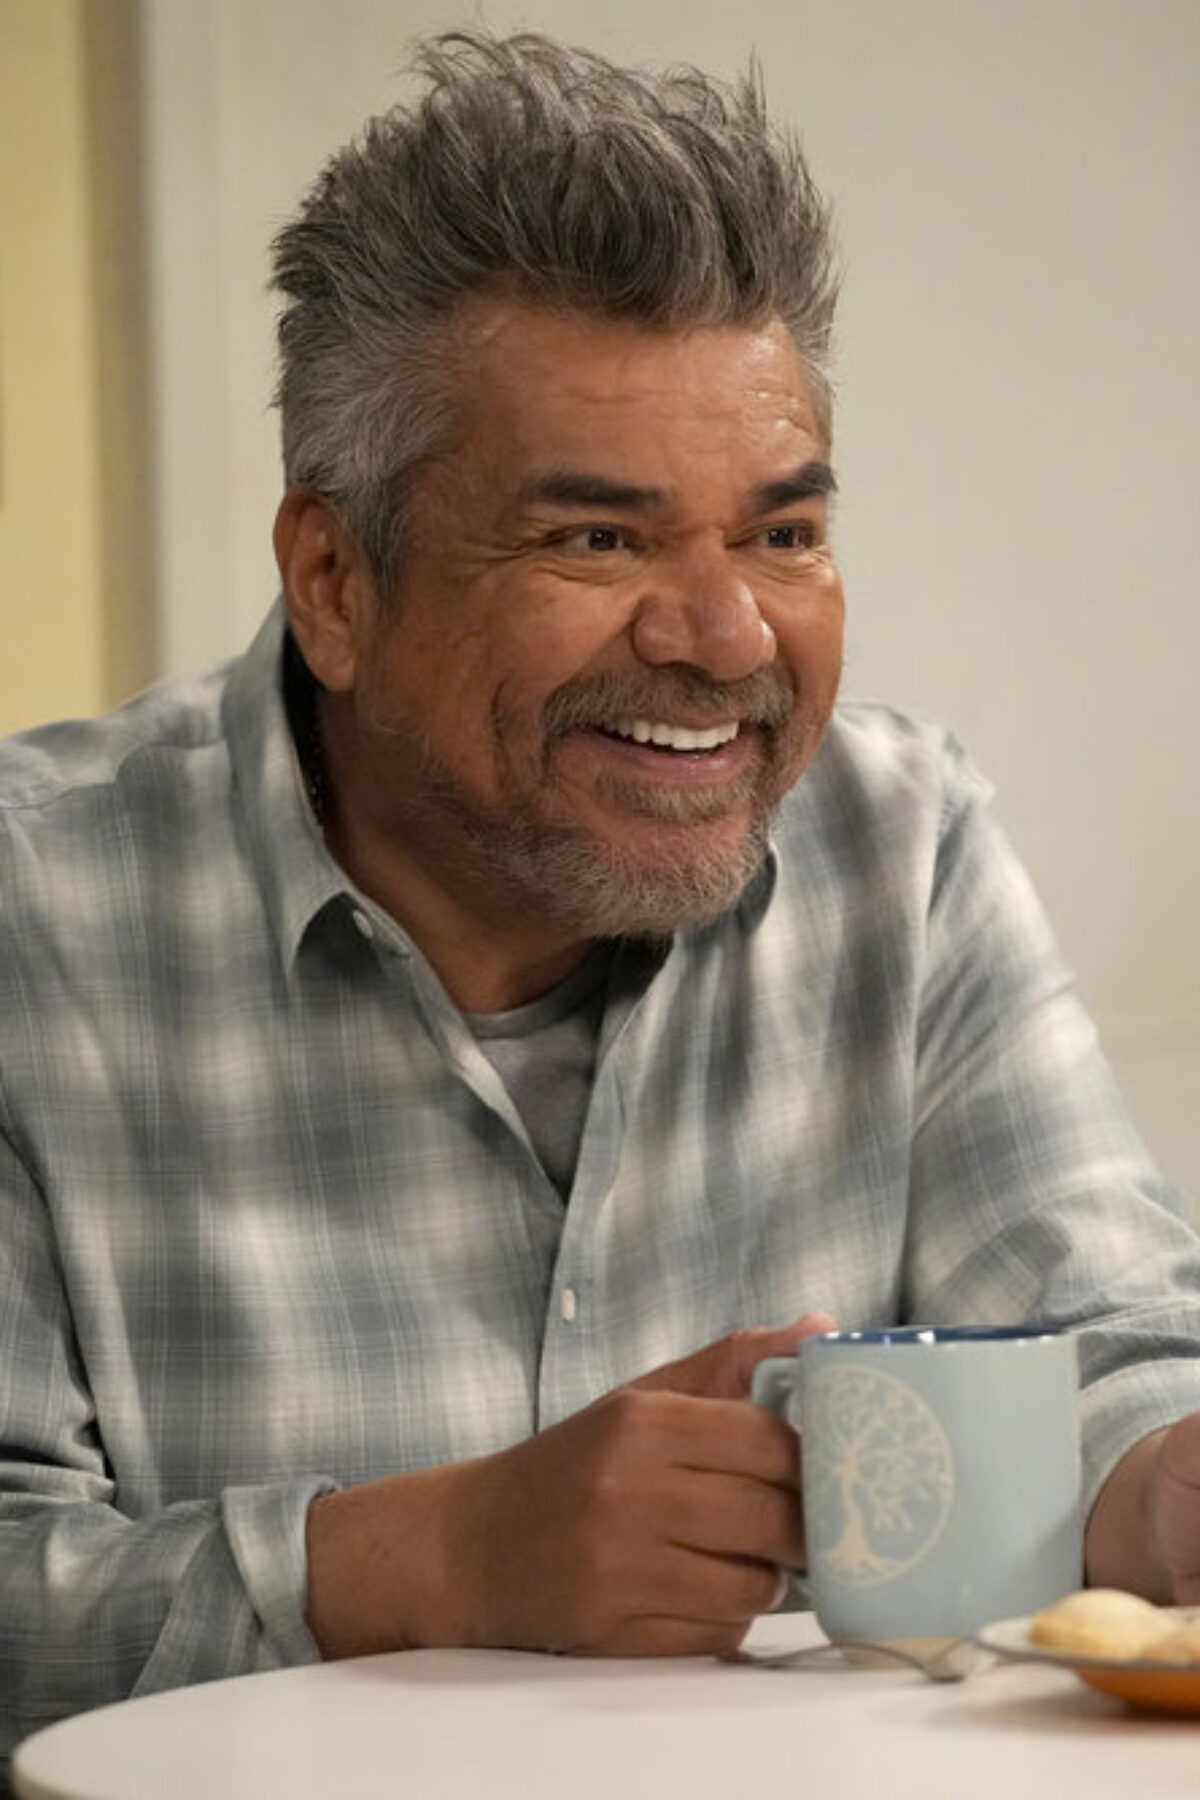 George Lopez (No Man’s Land) is back on TV with a new eponymous sitcom on NBC. Lopez vs. Lopez